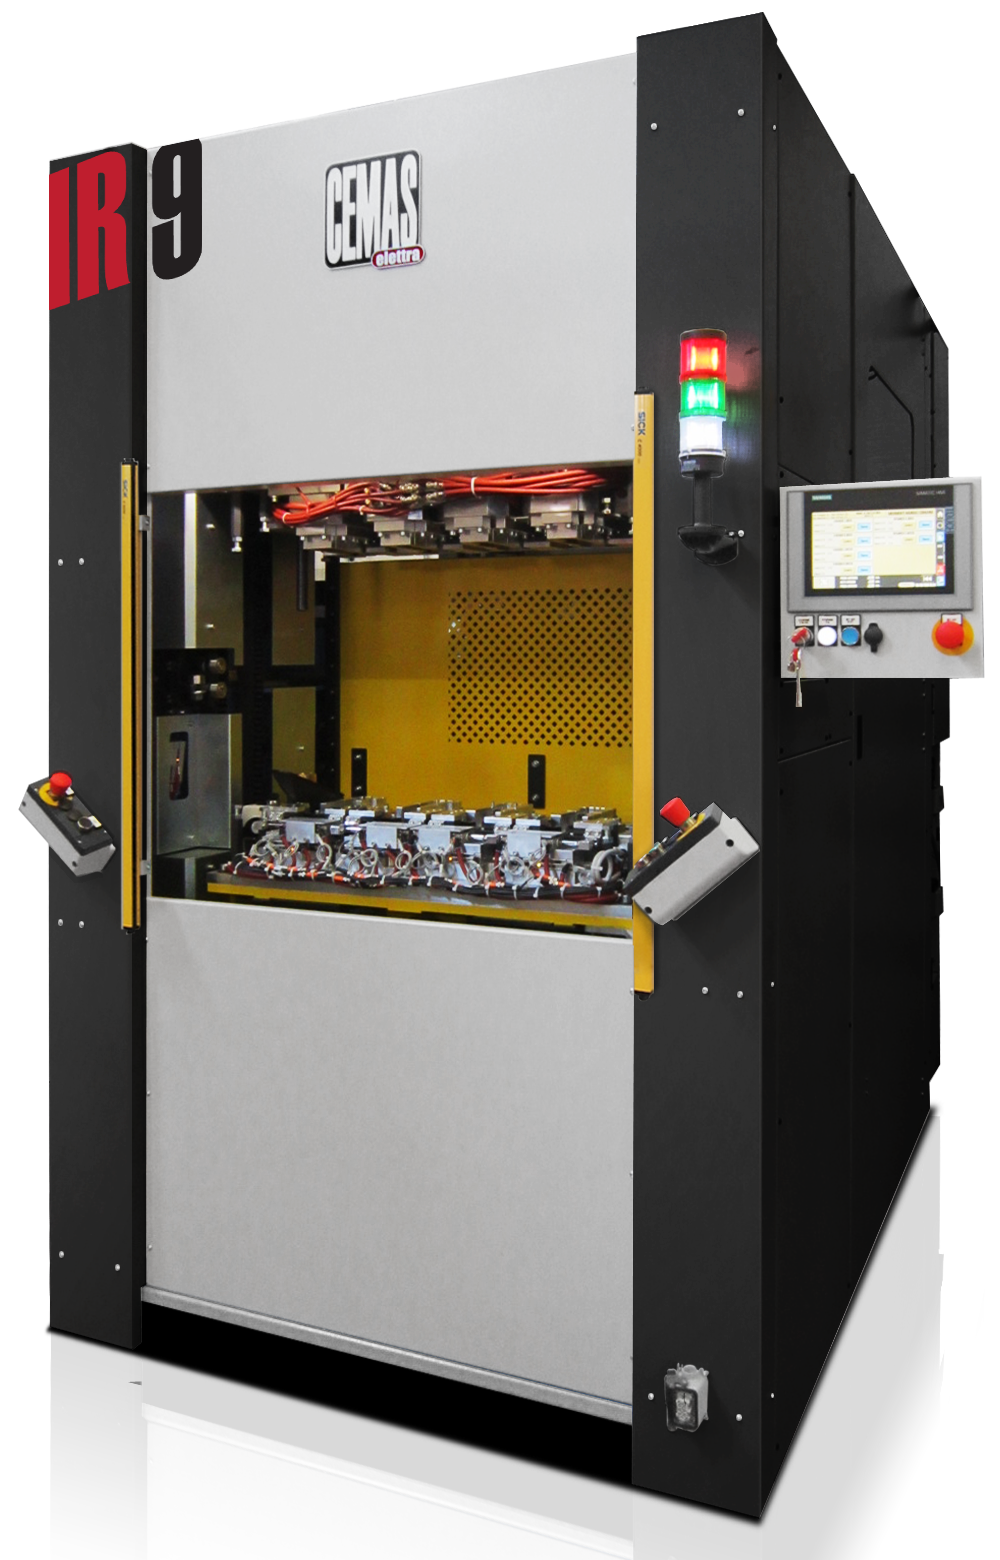 UK Manufacturers of Highly Reliable Hotplate Welding Machines